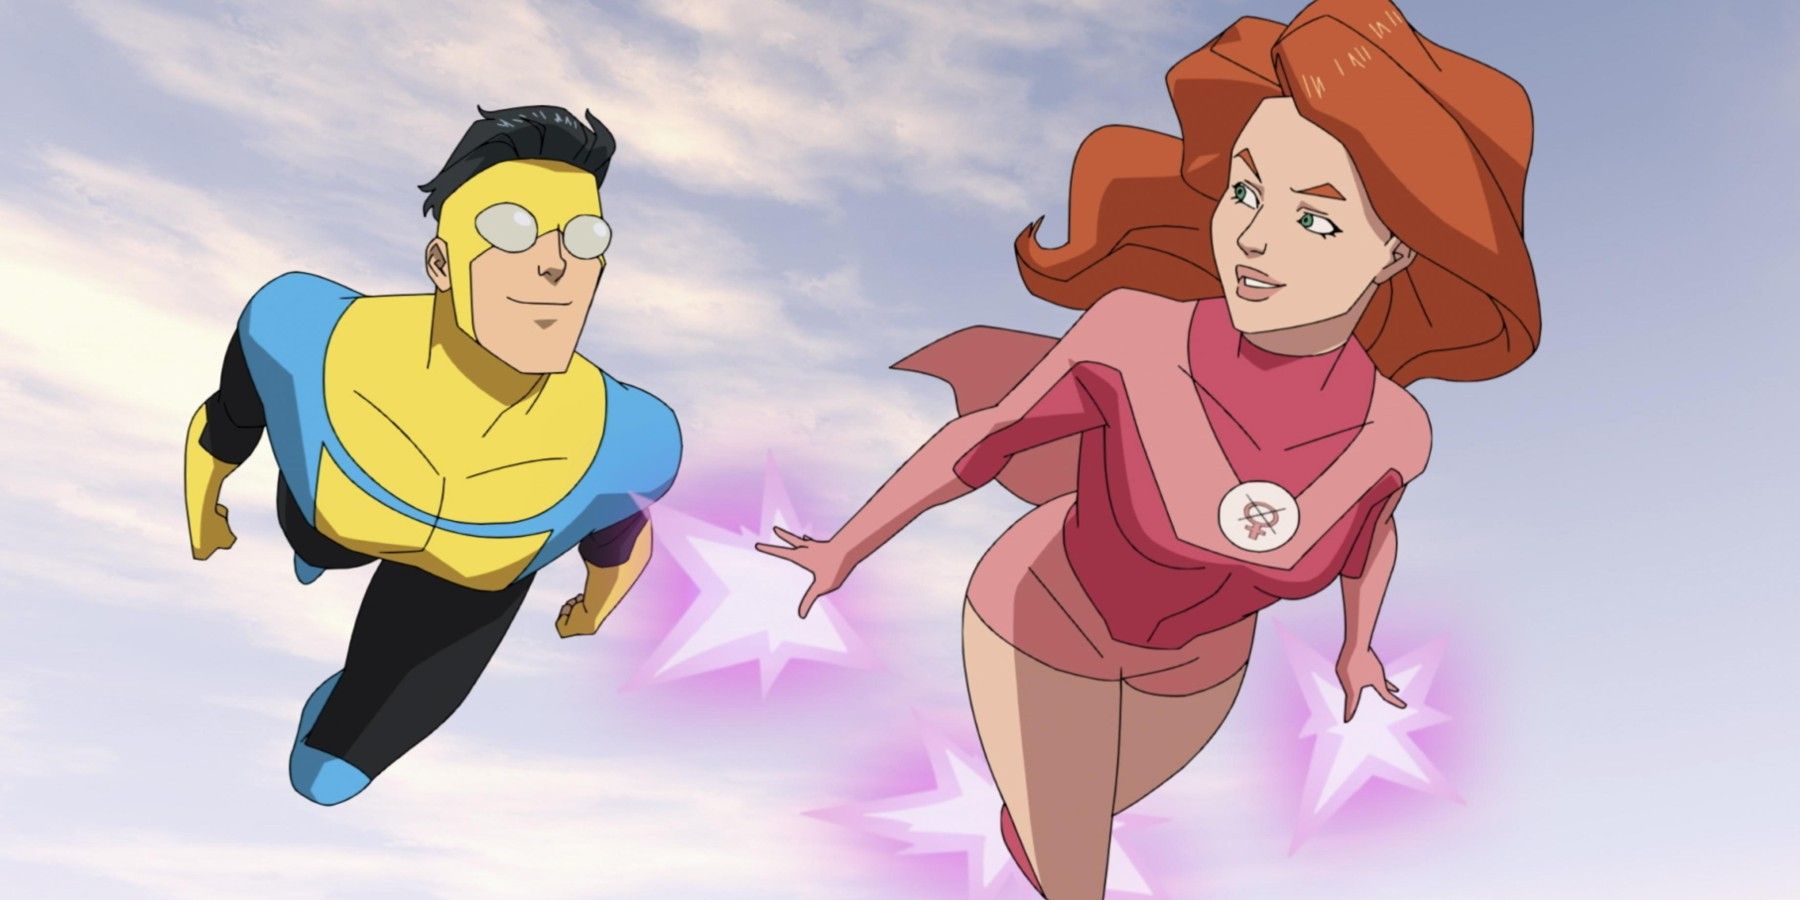 Invincible season 2 will hit the ground running when it returns in 2024